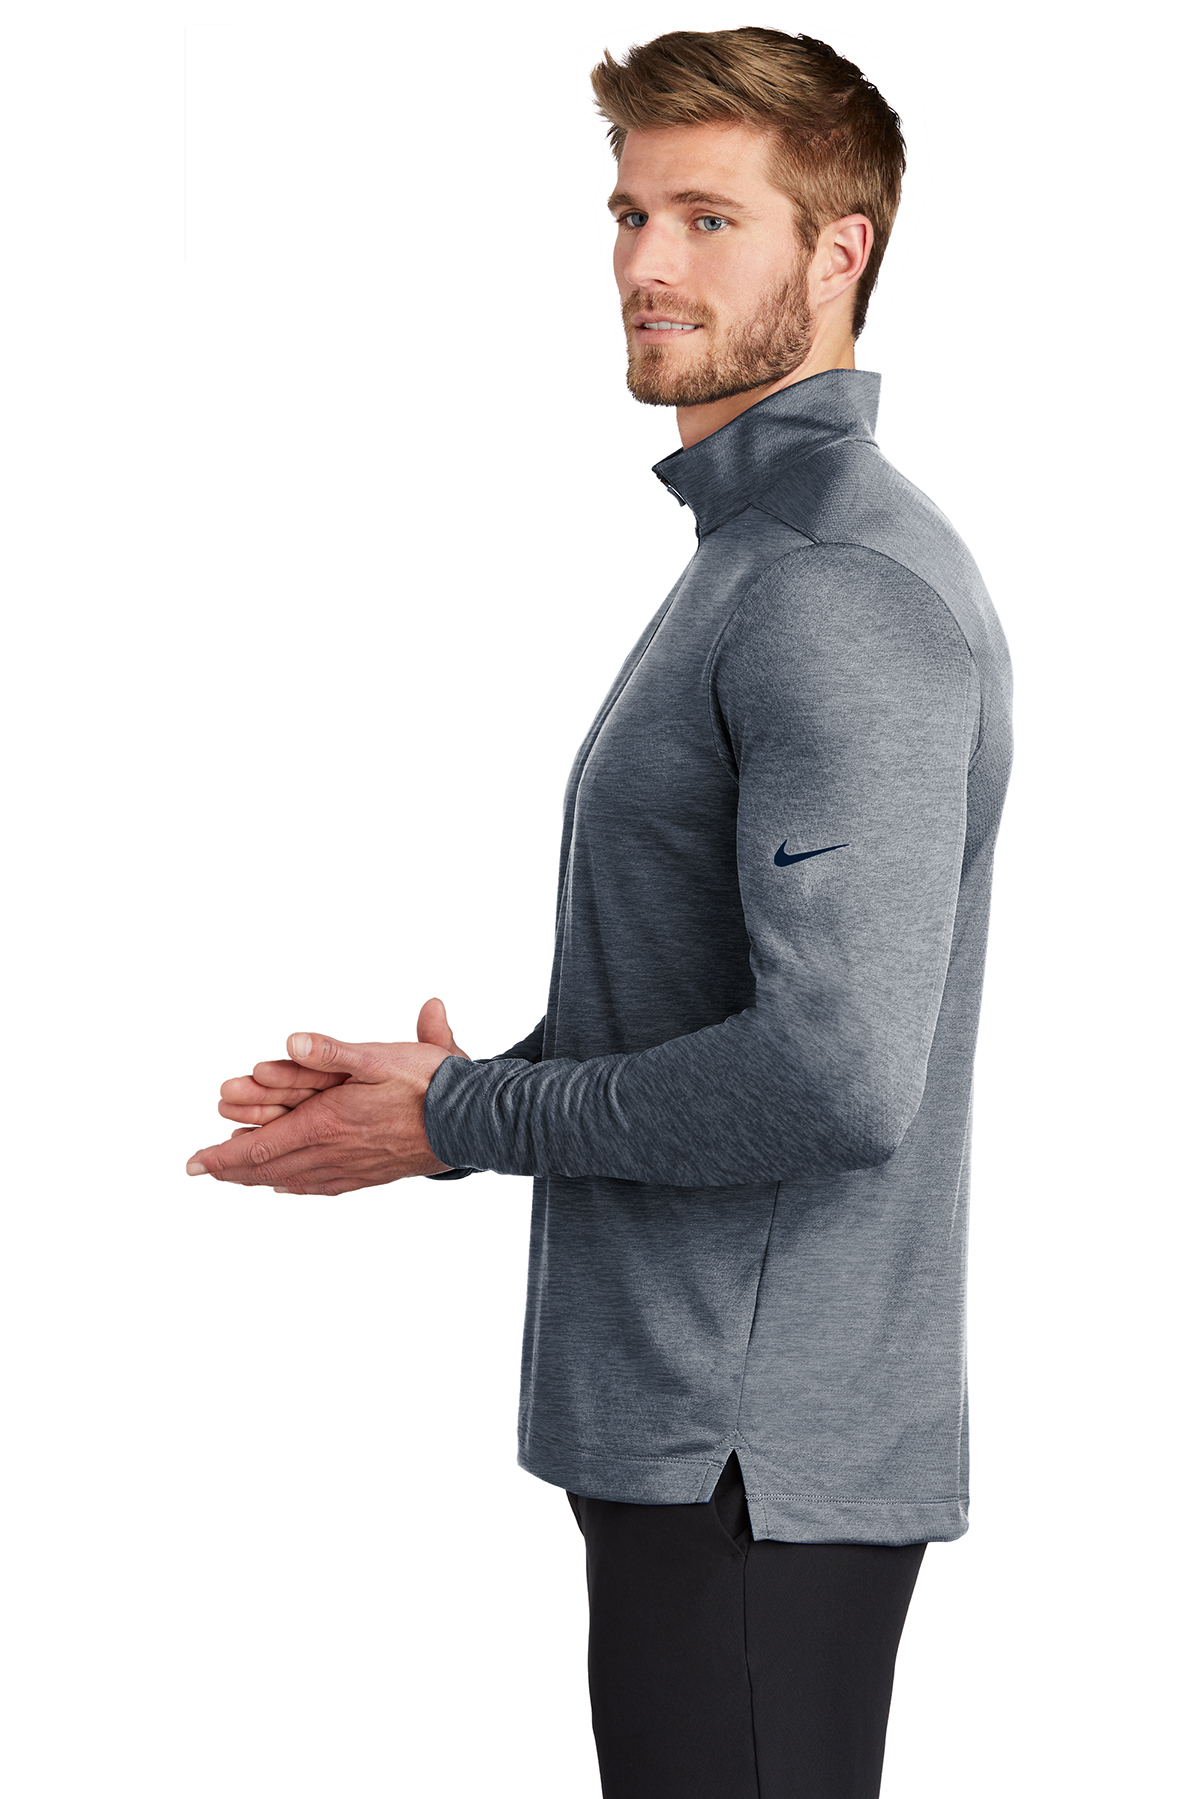 | Cover-Up Nike 1/2-Zip Product SanMar | Dry